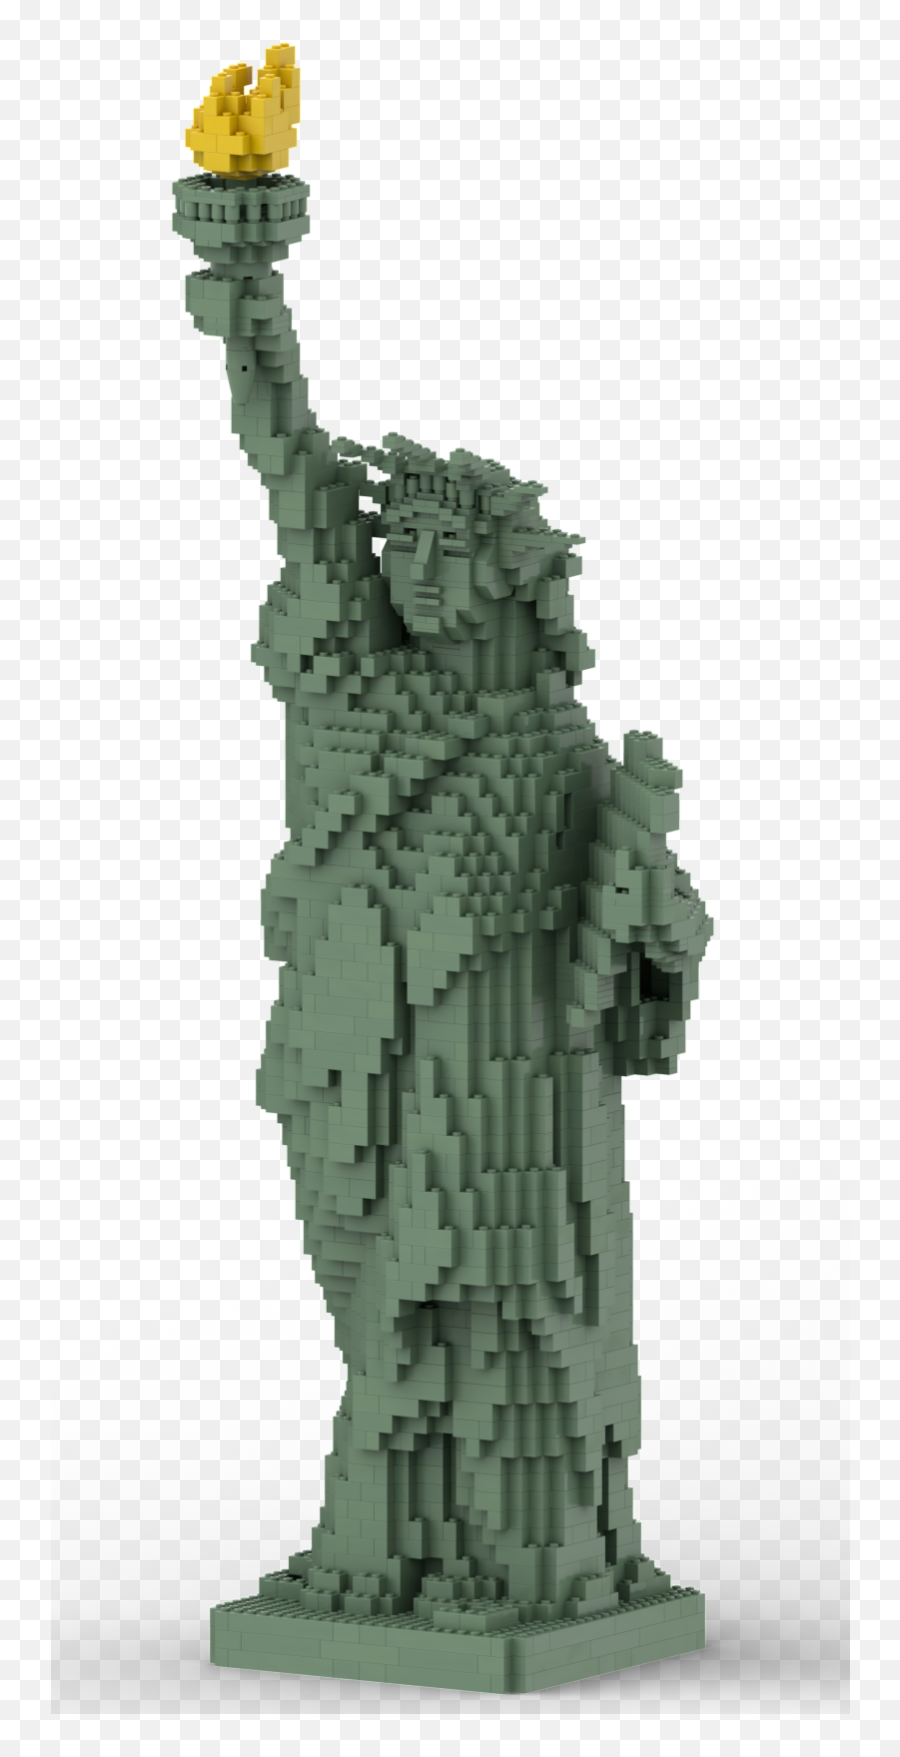 Statues Of Liberty - Statue Emoji,Statue Of Liberty Emotions Of Surprised